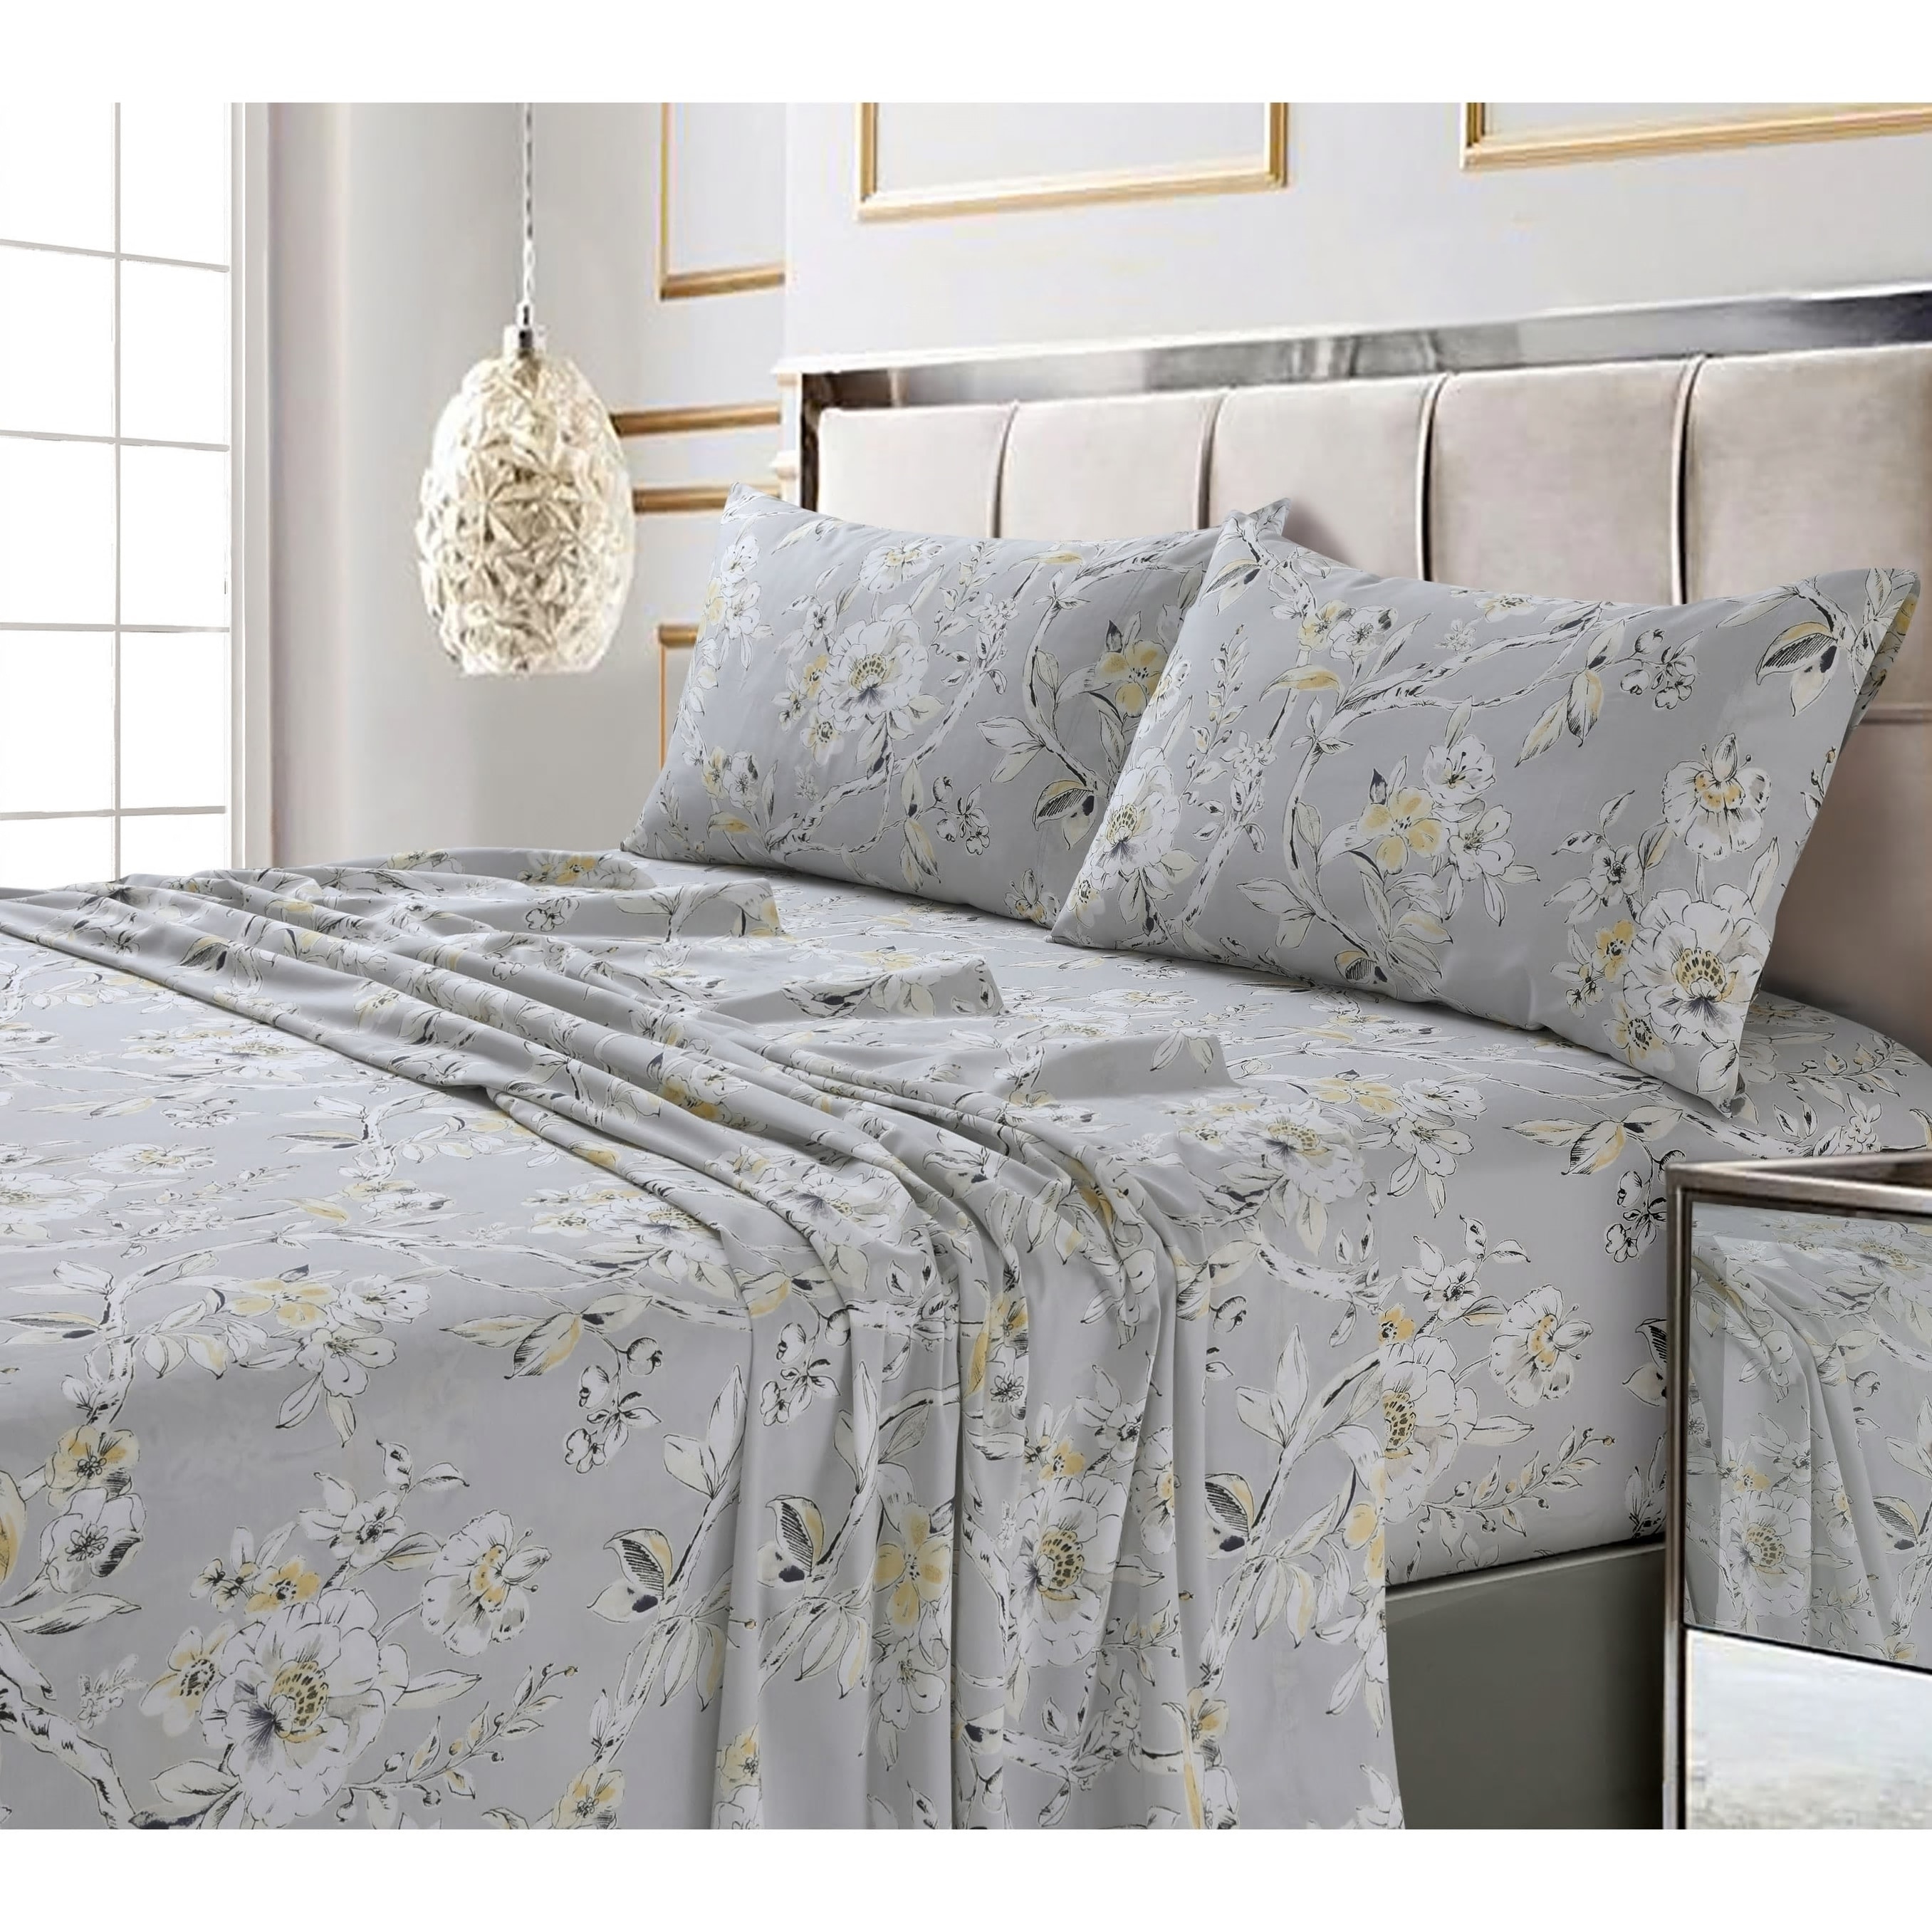 Canterbury Print 300 Thread Count Cotton Sheet Set Multiple Colors and Sizes 